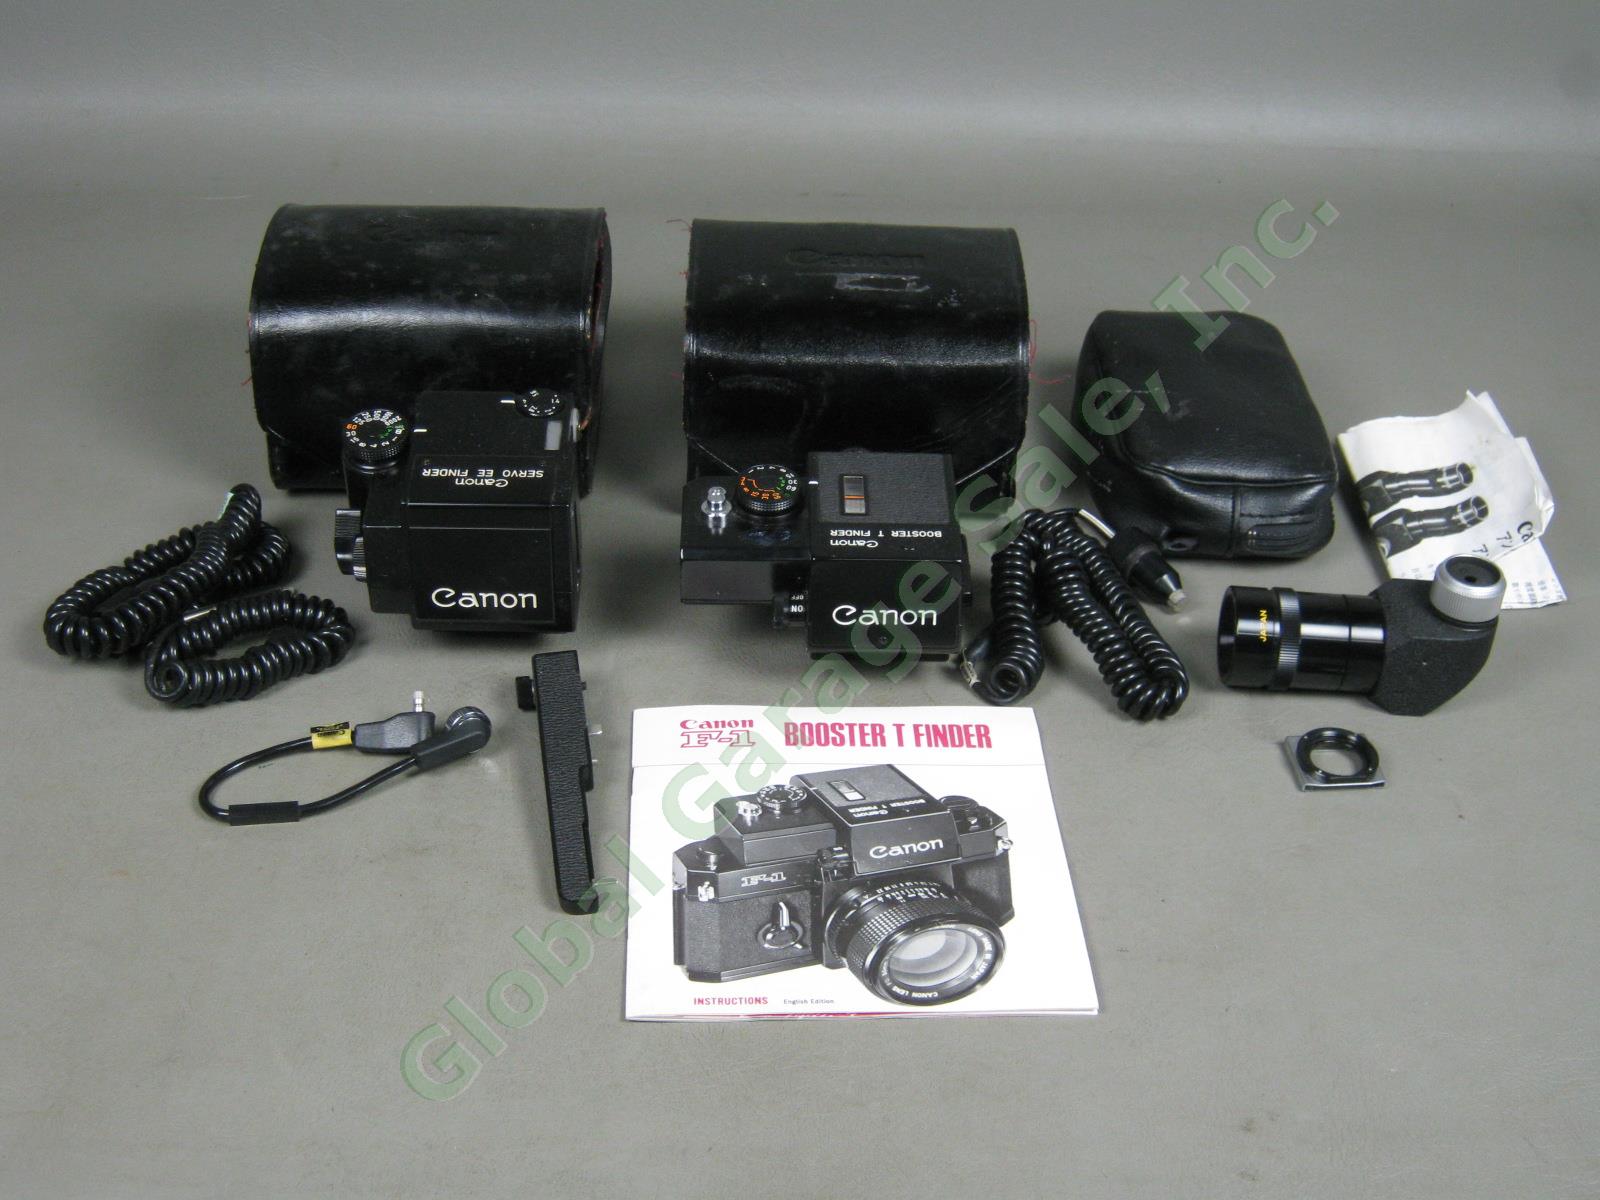 3 Canon Finders Lot Servo EE + Booster T + Angle B for F-1 Camera NO RESERVE!